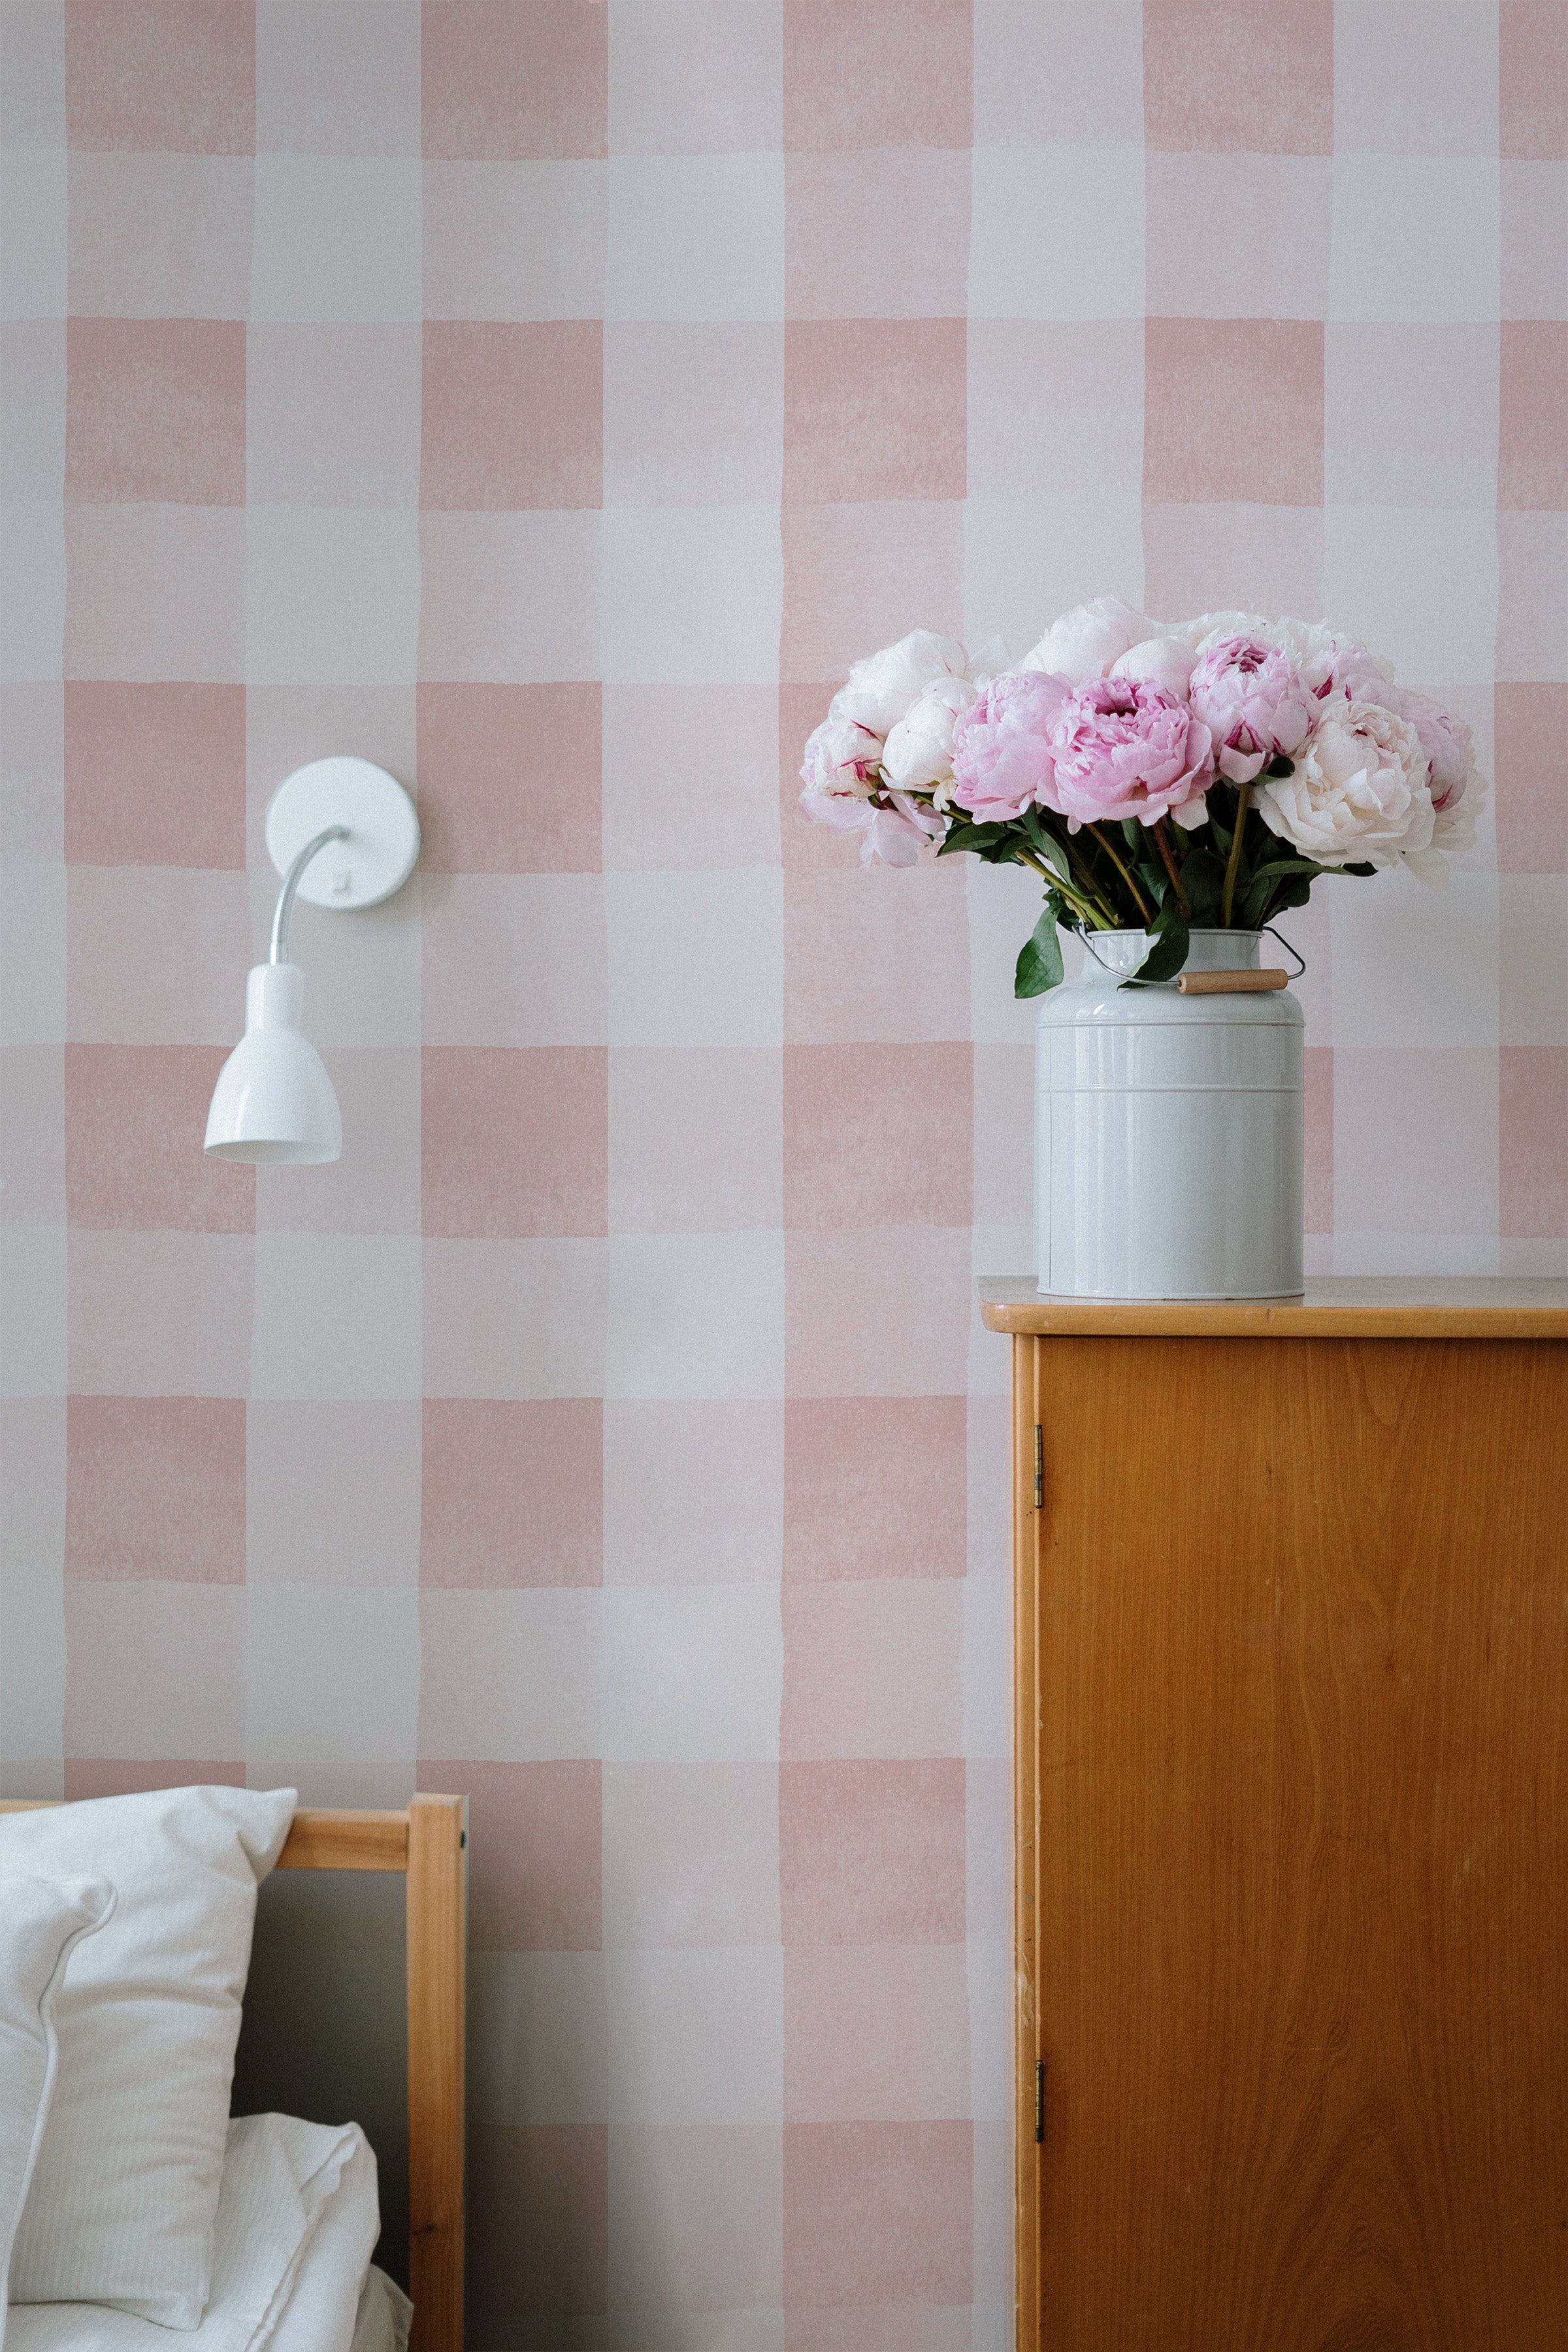 A serene bedroom corner featuring Camille Wallpaper in dusty pink with a large checkered pattern. The soft pink tones of the wallpaper provide a warm and comforting ambiance, complemented by a white bedside lamp and a vase with fresh pink peonies on a wooden cabinet